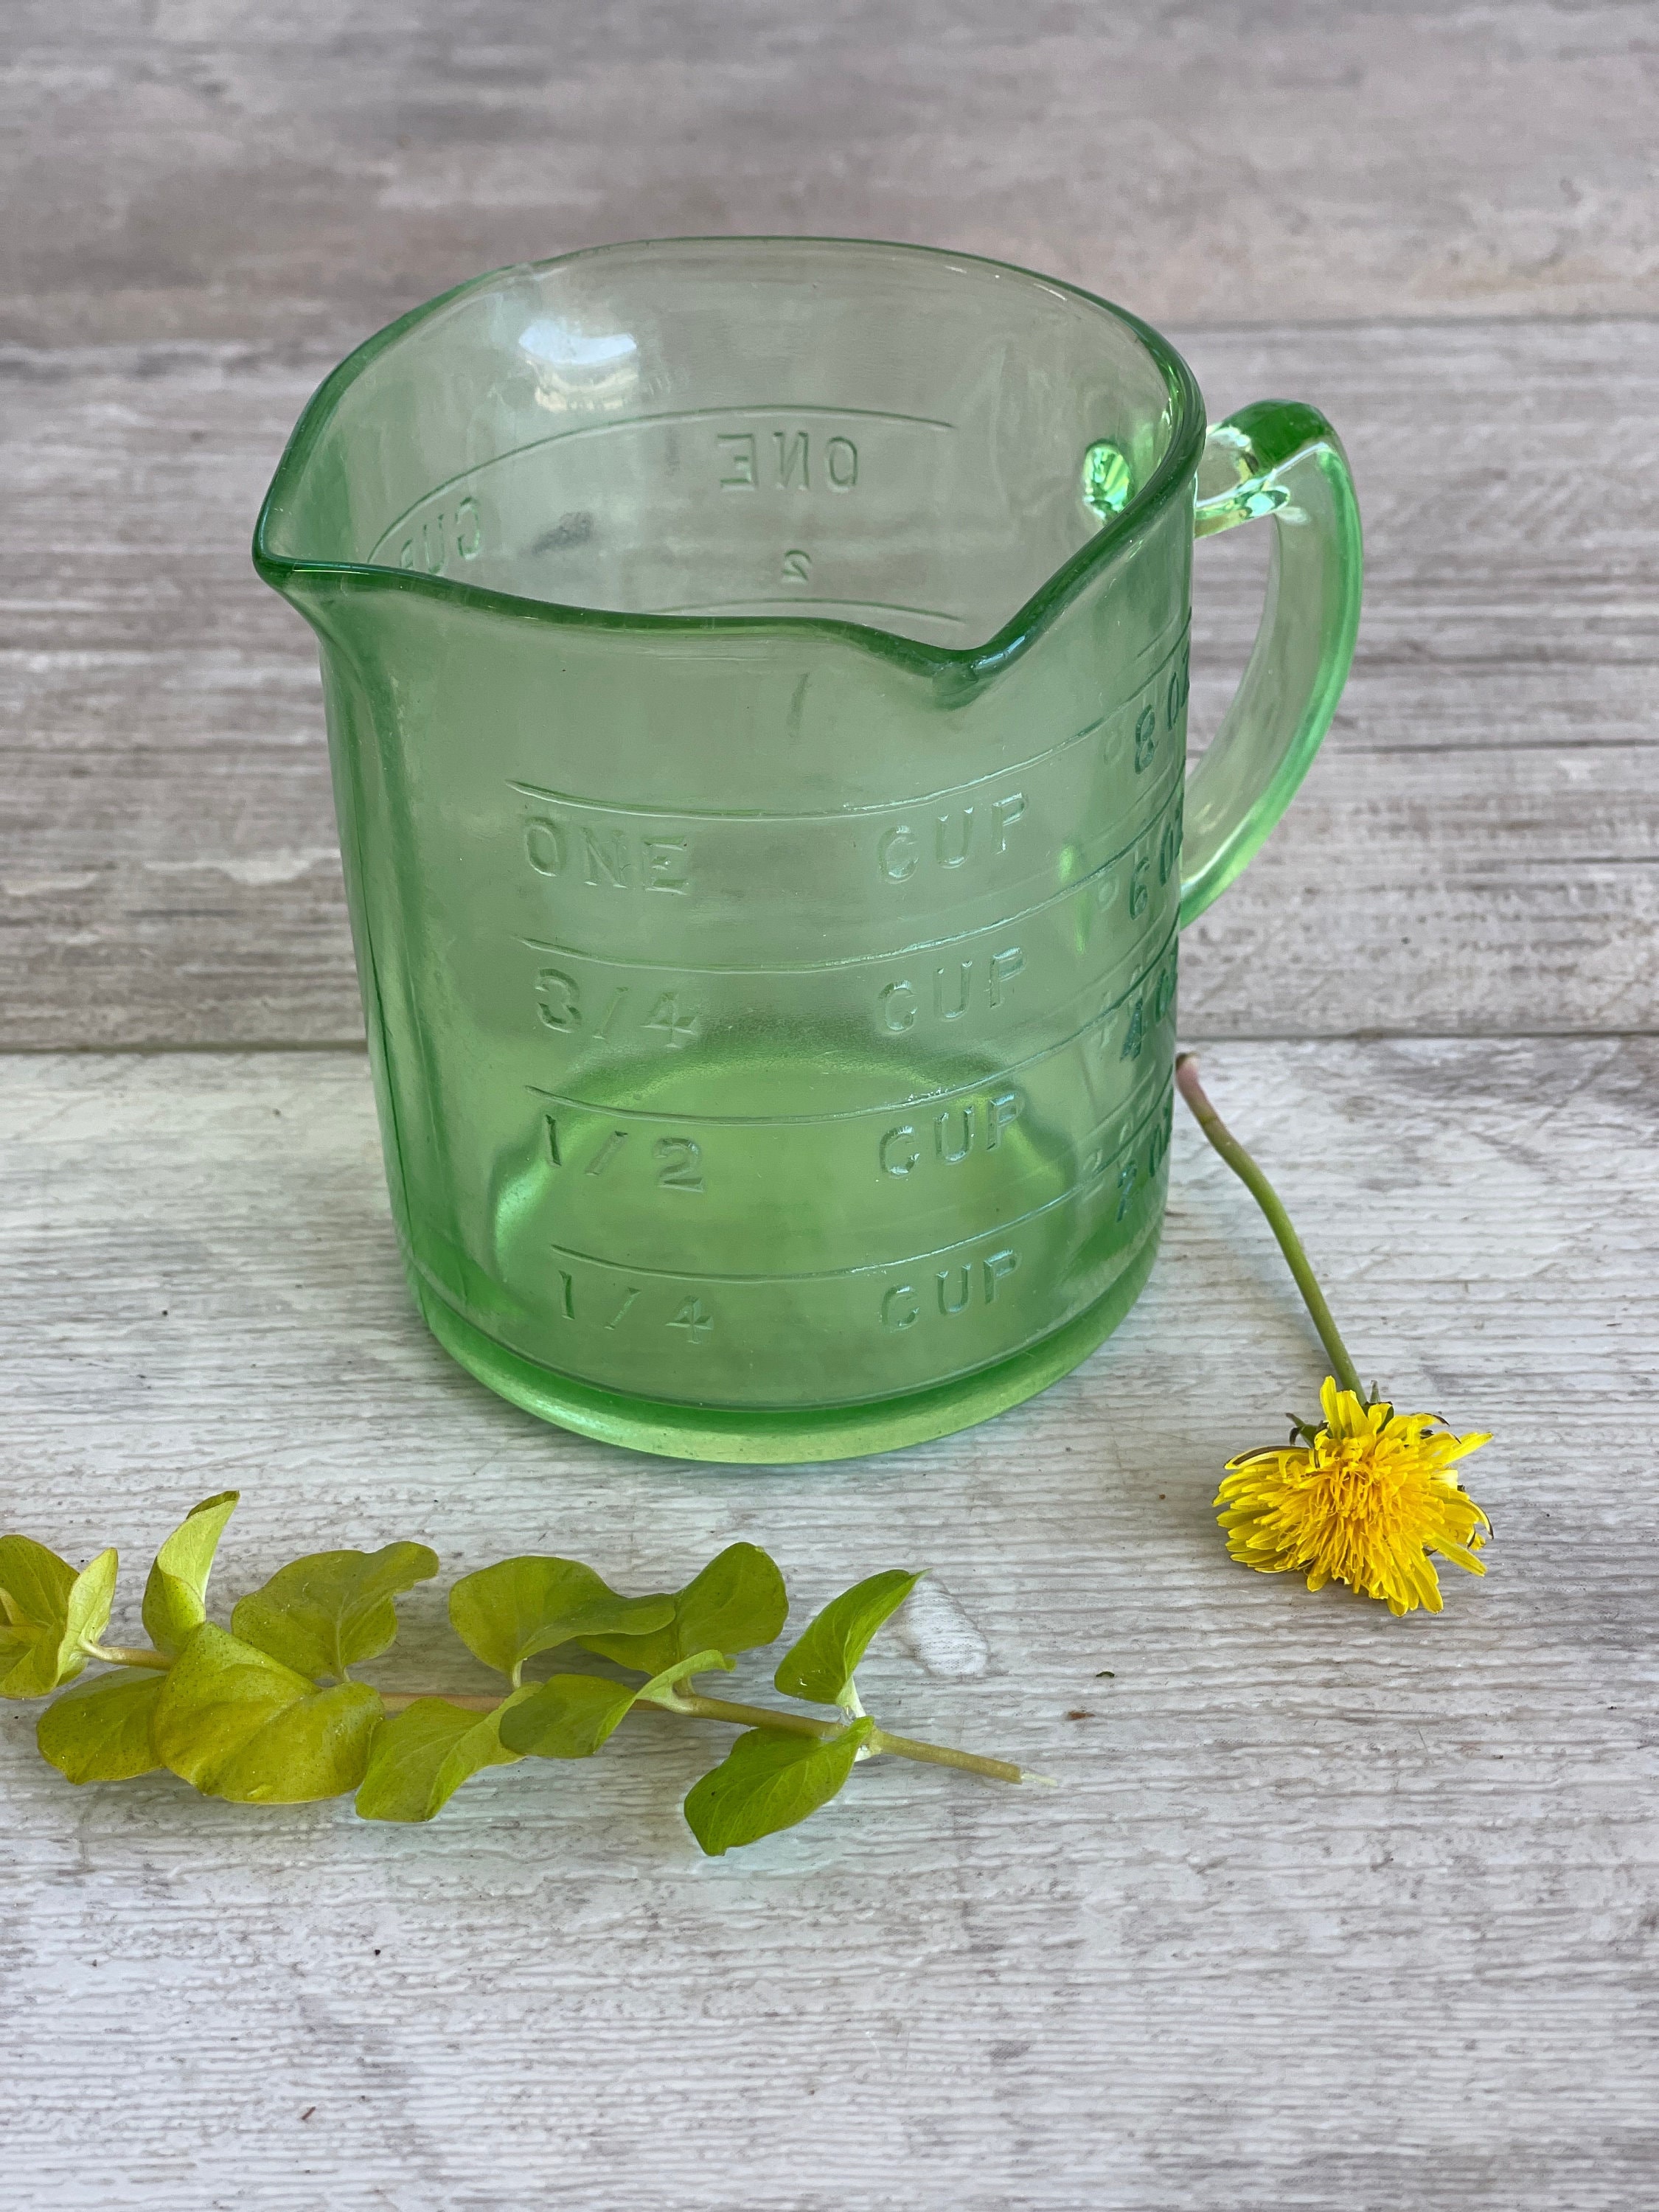 Vintage Anchor Hocking, 3 Spout Measuring Glass Cup 